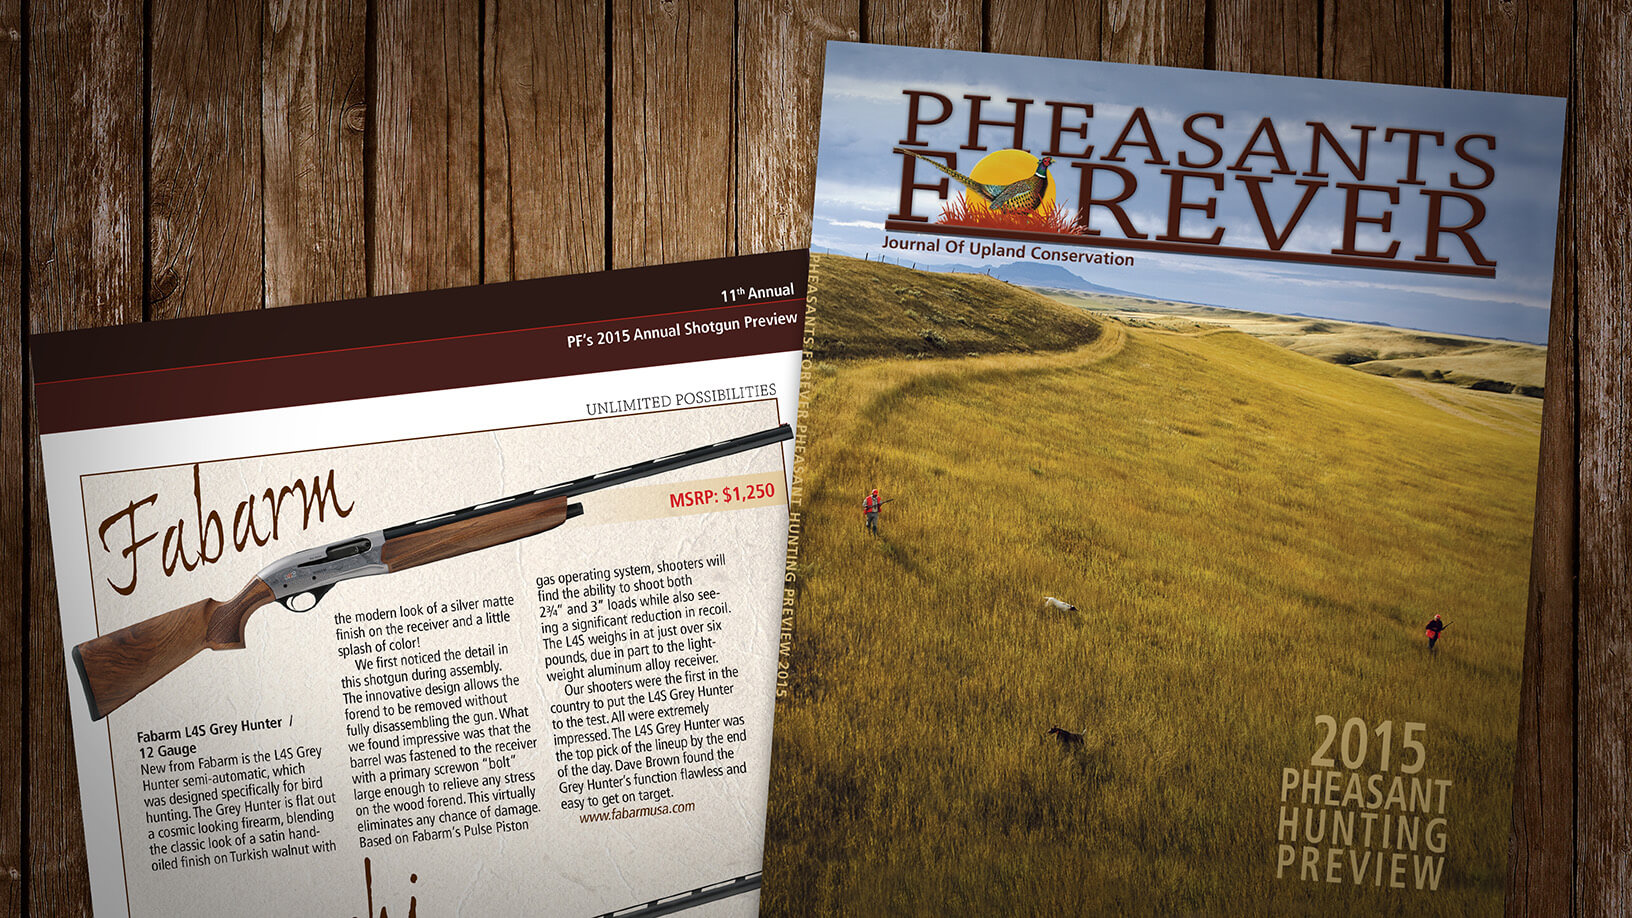 [Pheasants Forever] 2015 Hunting Preview: Fabarm L4S Grey Hunter